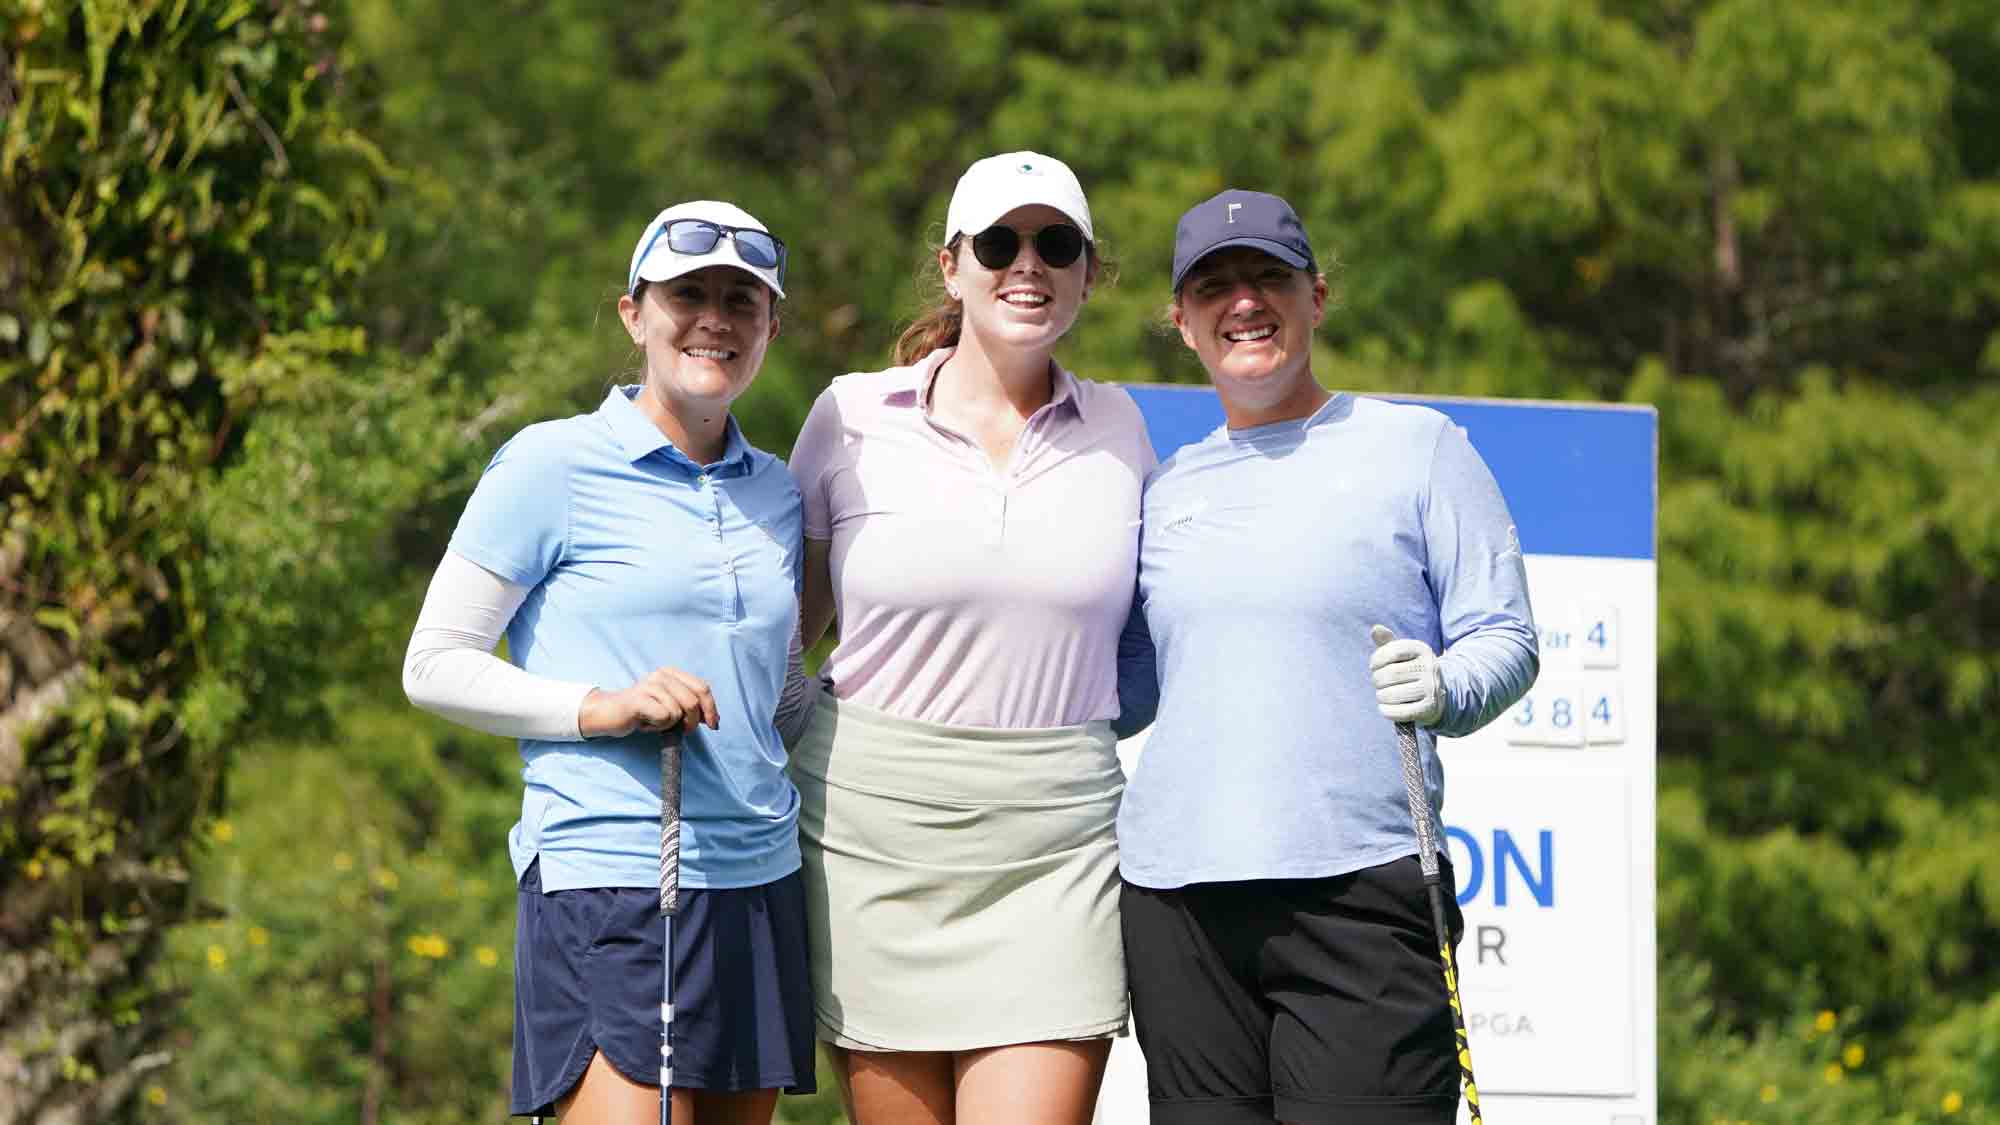 Lindsey McCurdy, Katherine Smith and Kenzie Wright during a practice round ahead of the Epson Tour Championship